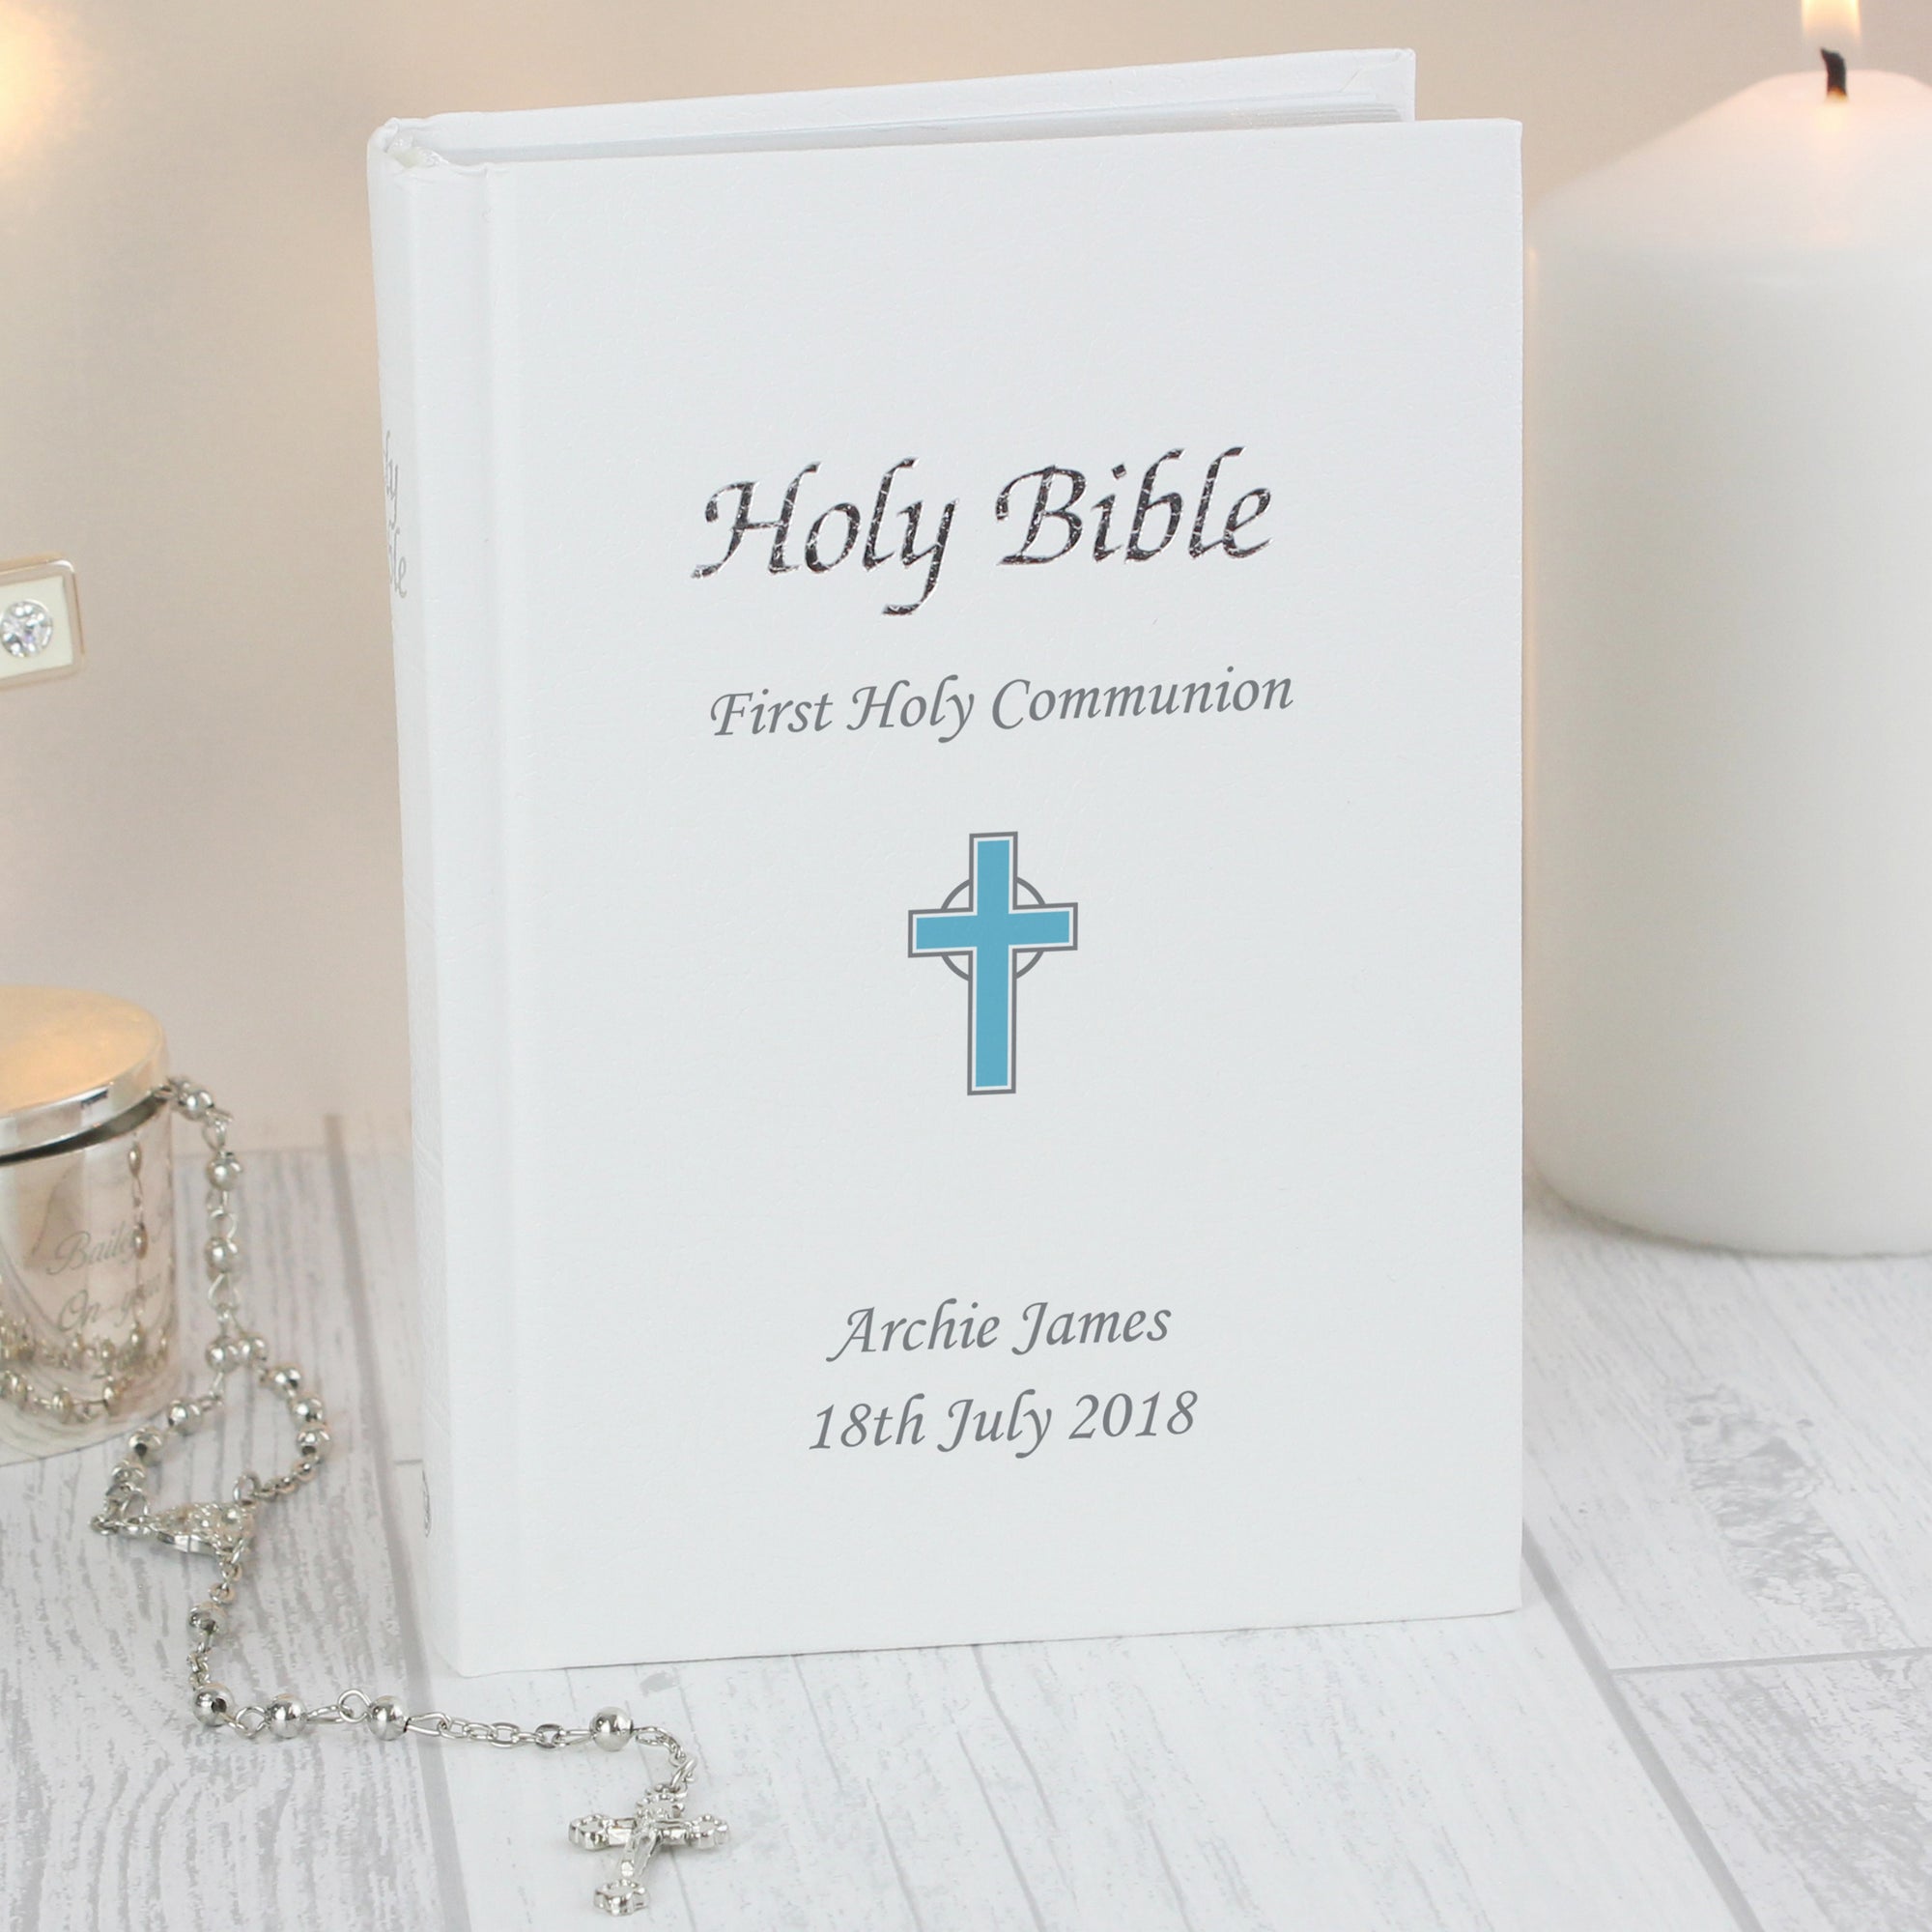 Image of a holy bible with a white leatherette cover featuring the text 'Holy Bible' and a blue cross. The cover can be personalised with 3 lines of text, one line will appear above the image of the cross and the remaining two lines will appear below the image of the cross. The text is printed in silver and the bible has a ribbon bookmark and the pages are edged in silver leaf.